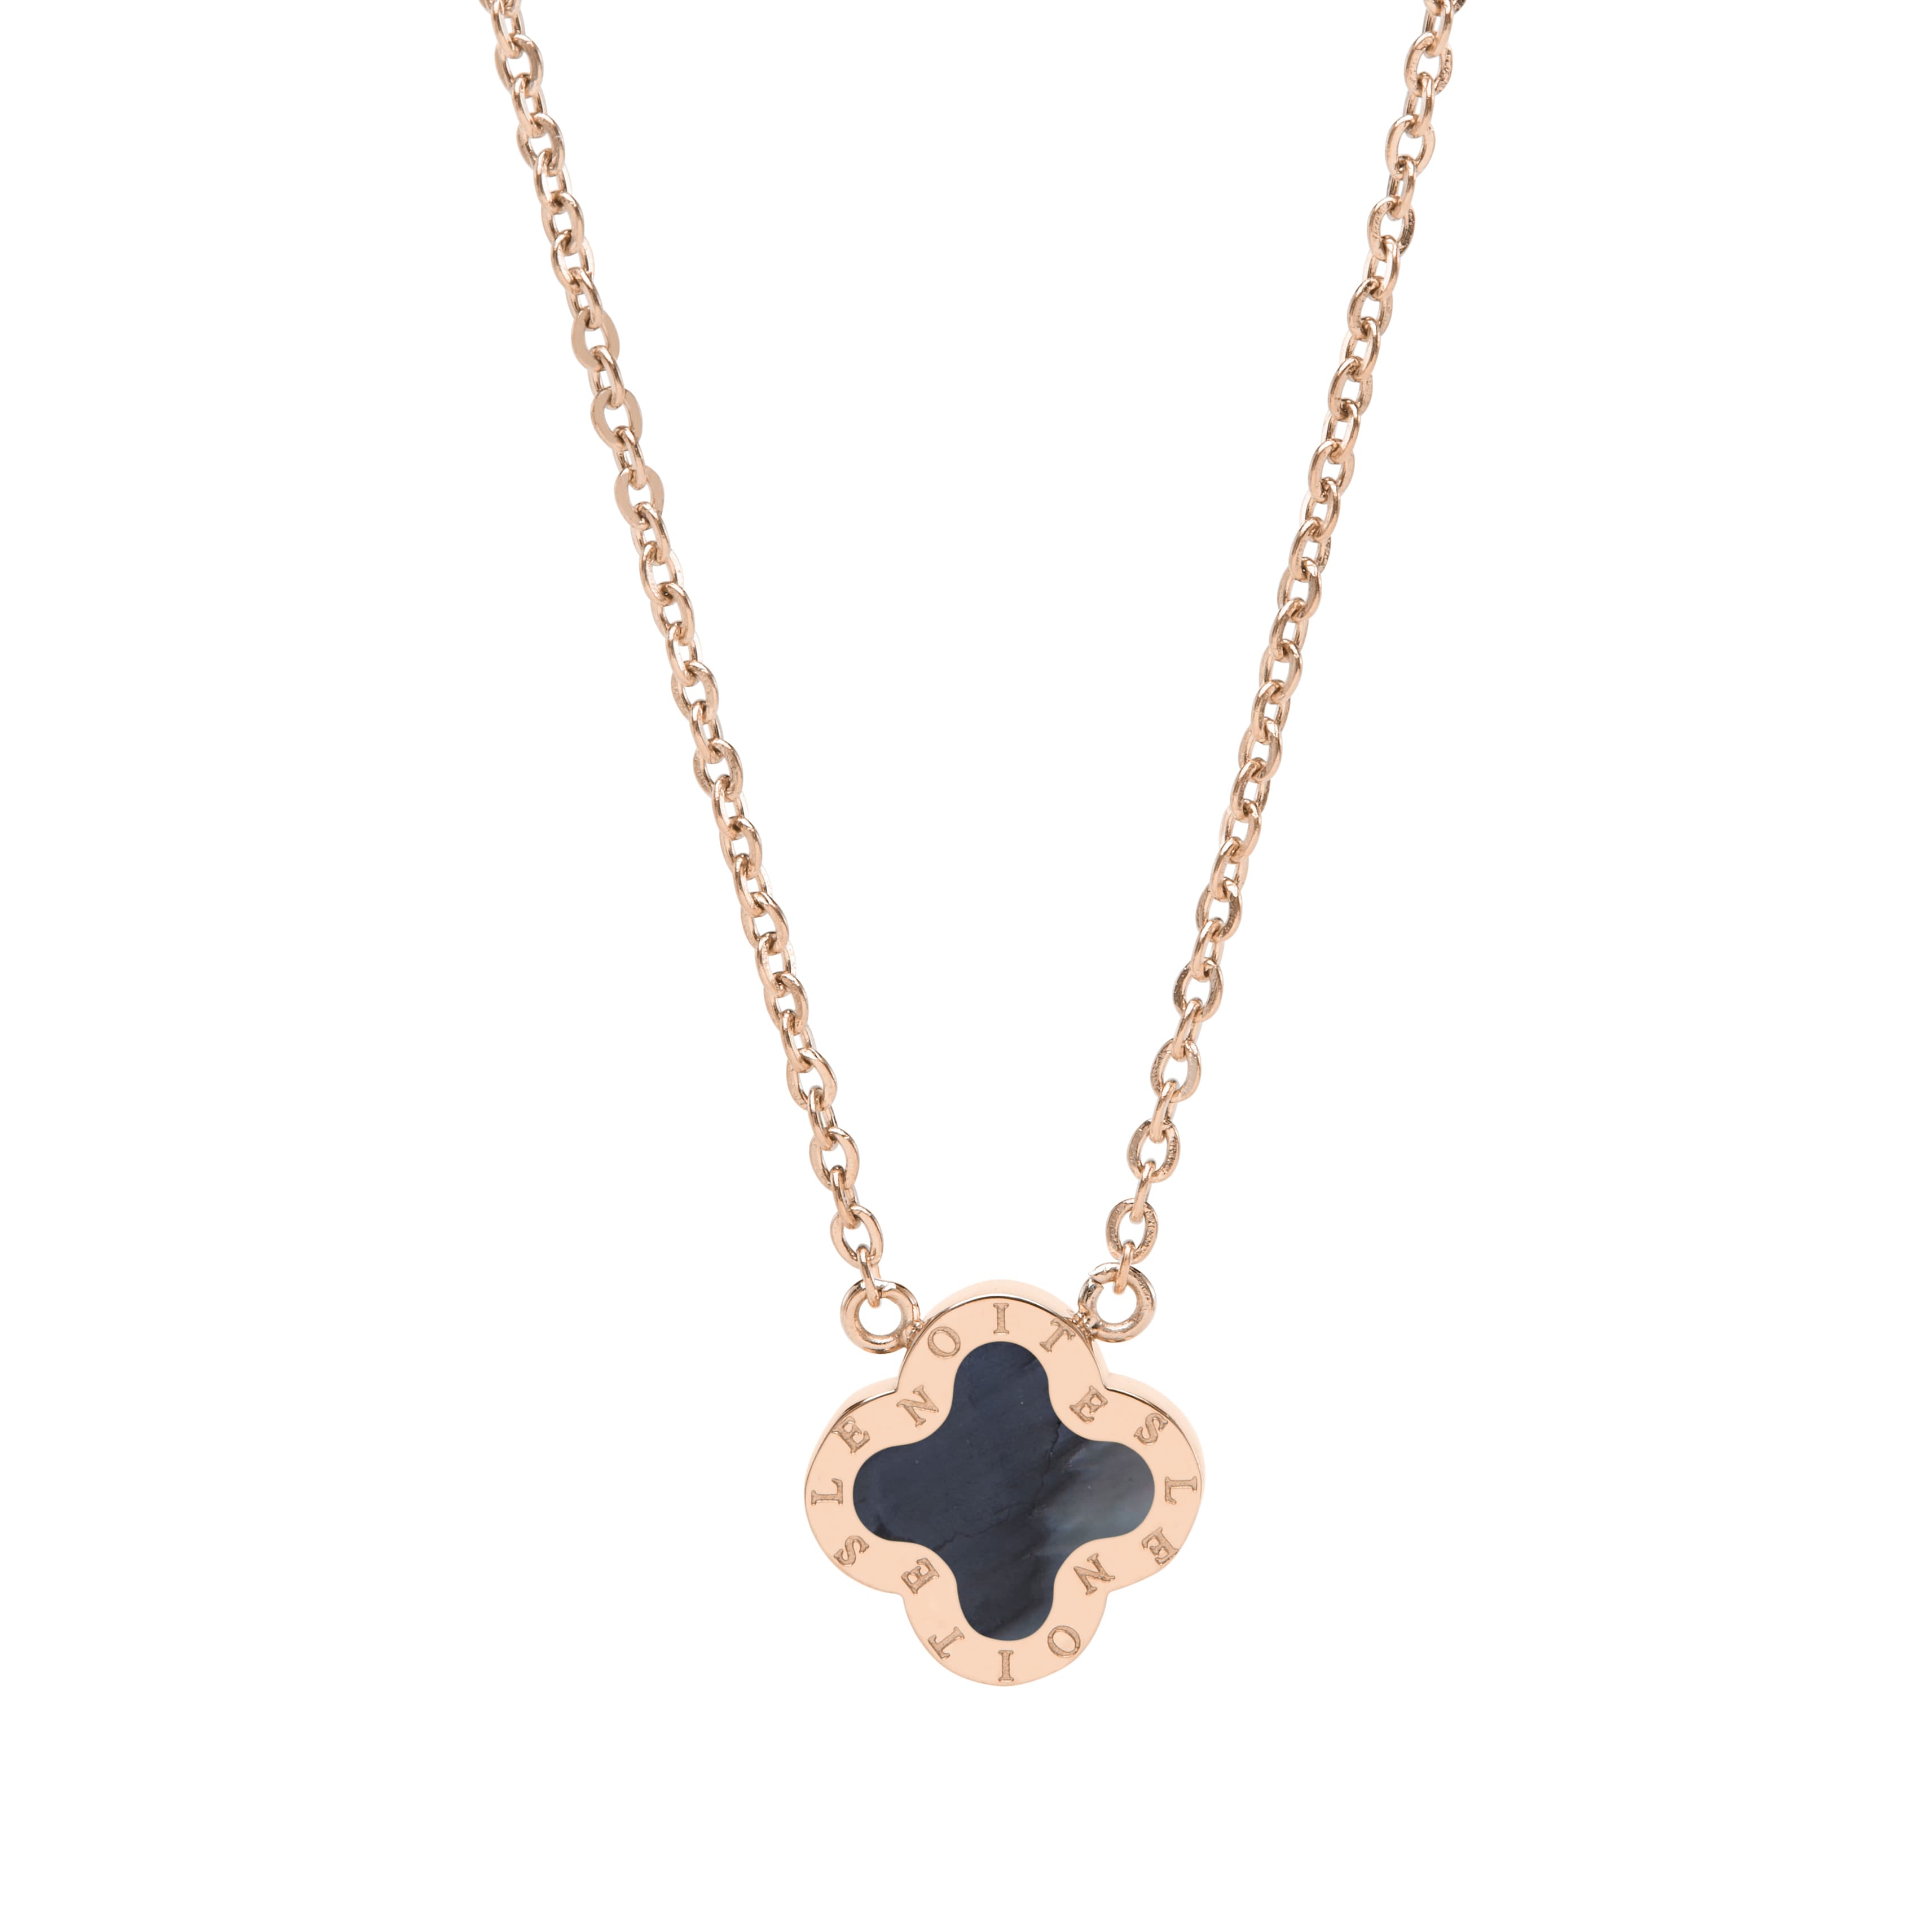 Four-Leaf Clover Necklace Mini, Rose Gold & Mother of Pearl Grey